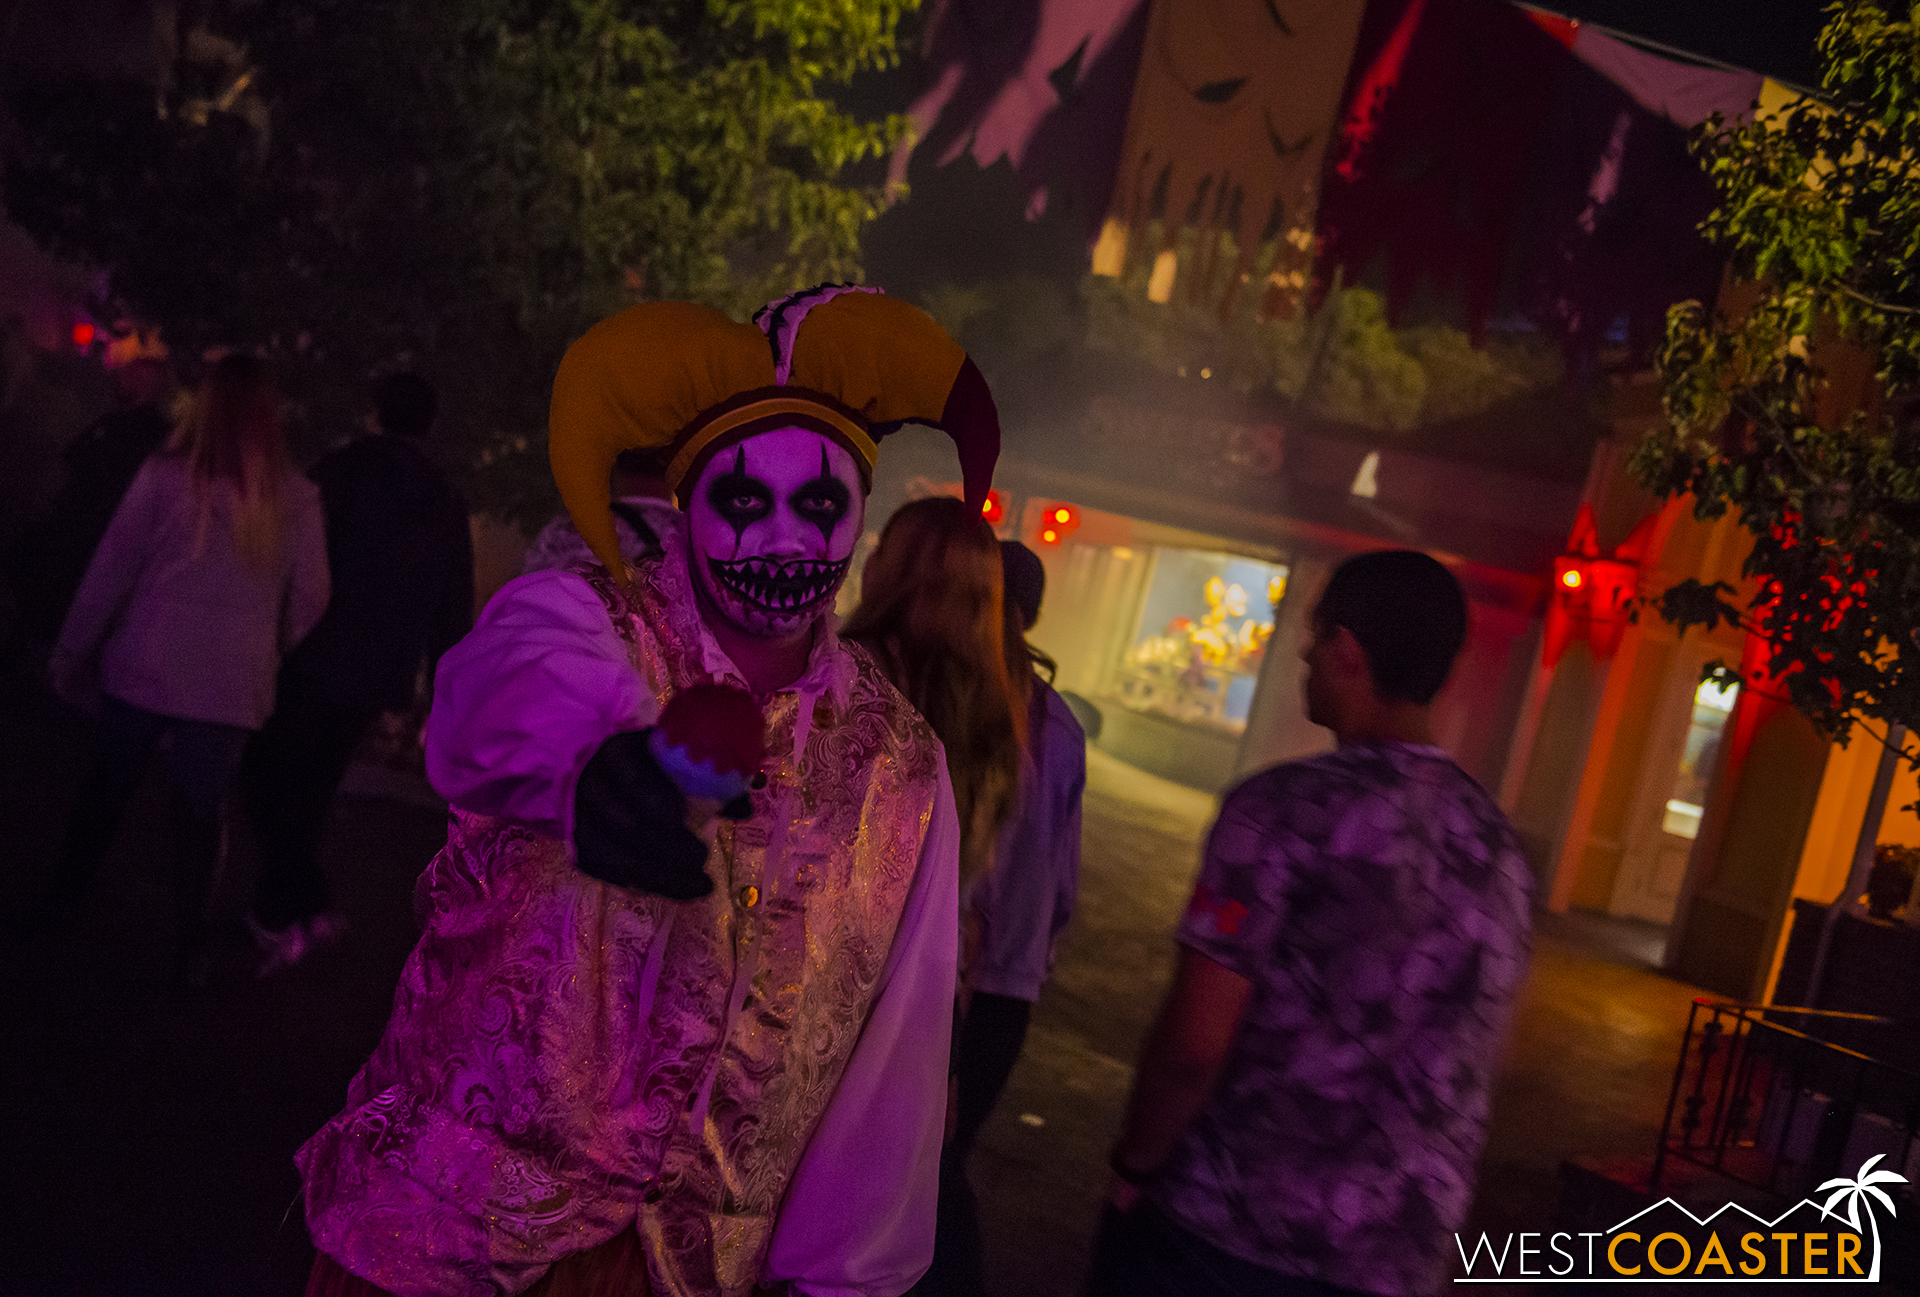  Unfortunately, it fell far short of expectations placed by this critic, who has been spoiled by Carnevil at Knott's Scary Farm. 